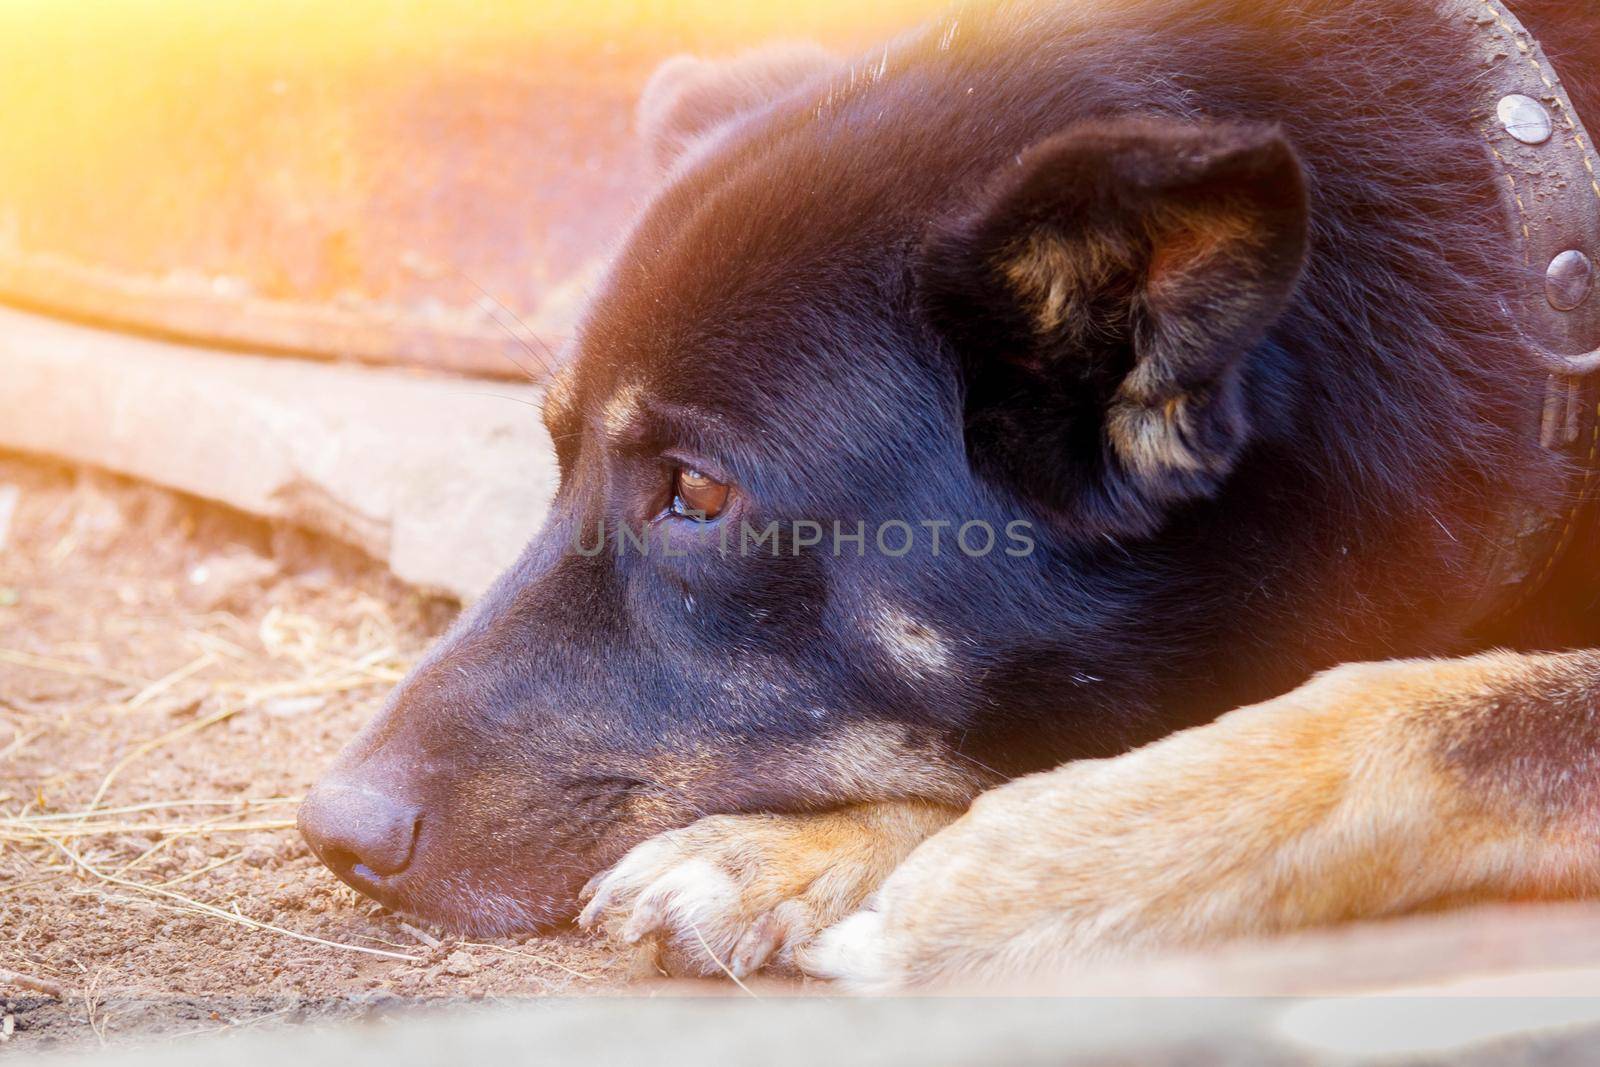 The black dog guards the house. The dog guards the owner's property.  by Verrone